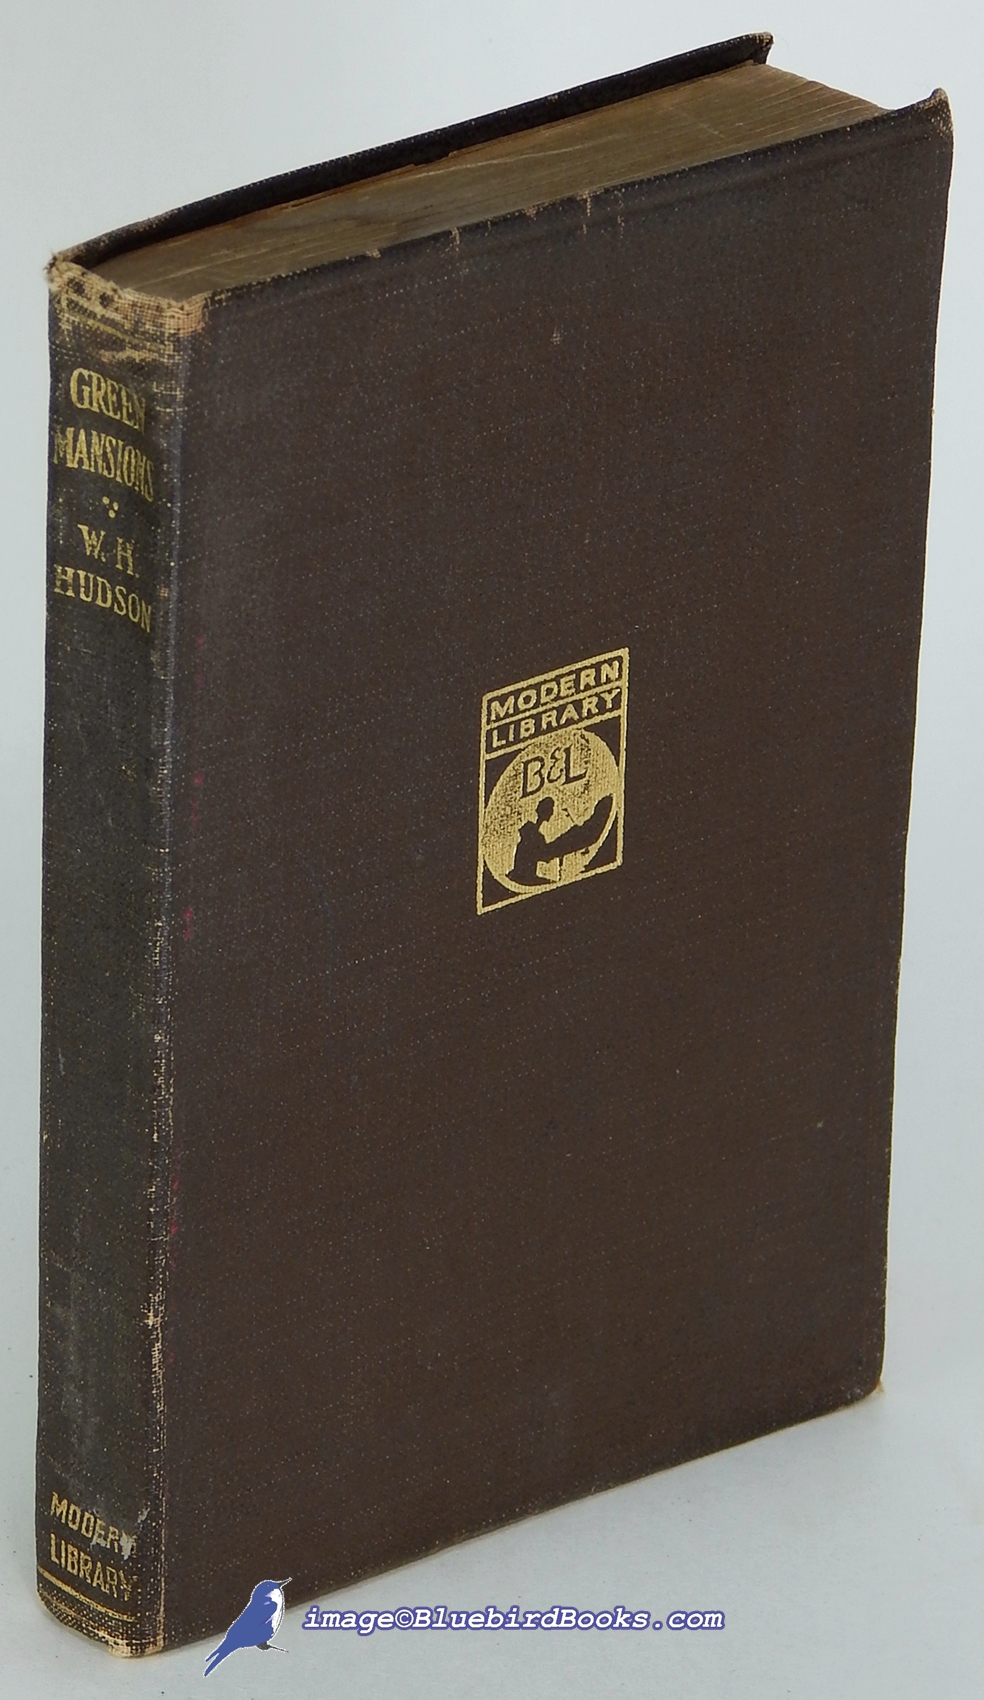 HUDSON, W. H. - Green Mansions, a Romance of the Tropical Forest: Modern Library Limp Leatherette Spine 3 (Modern Library #89. 1)